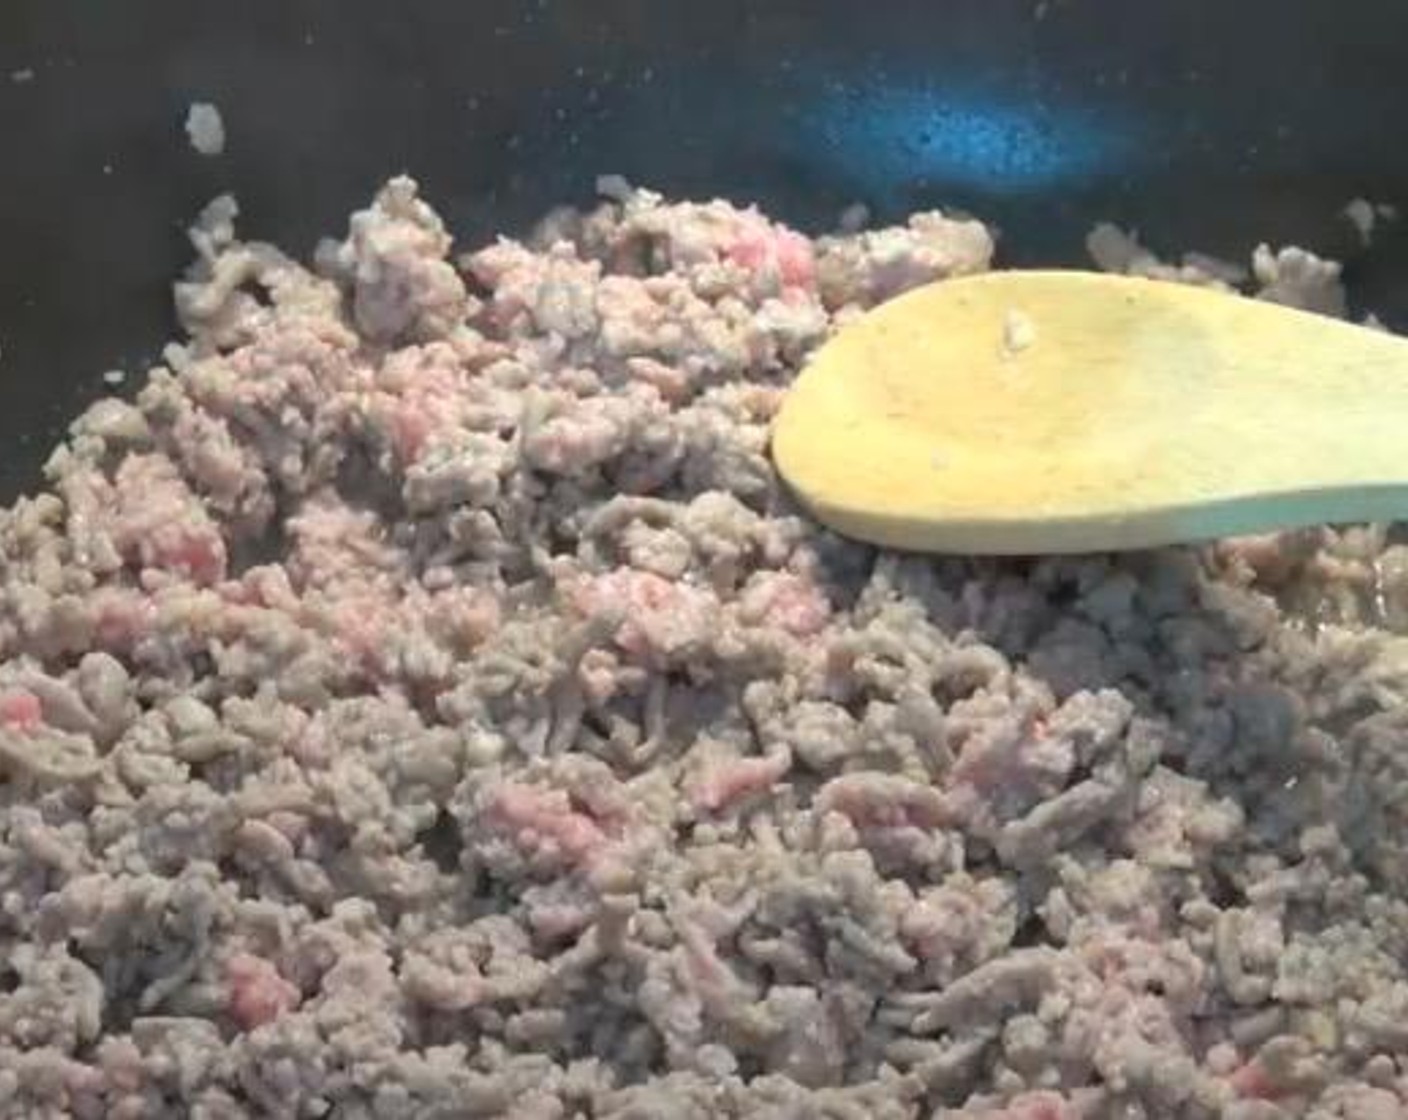 step 1 In a fry pan, add Vegetable Oil (1 Tbsp), Garlic (2 cloves), Fresh Ginger (1/2 Tbsp) and Ground Pork (1.1 lb). Fry until meat is browned.